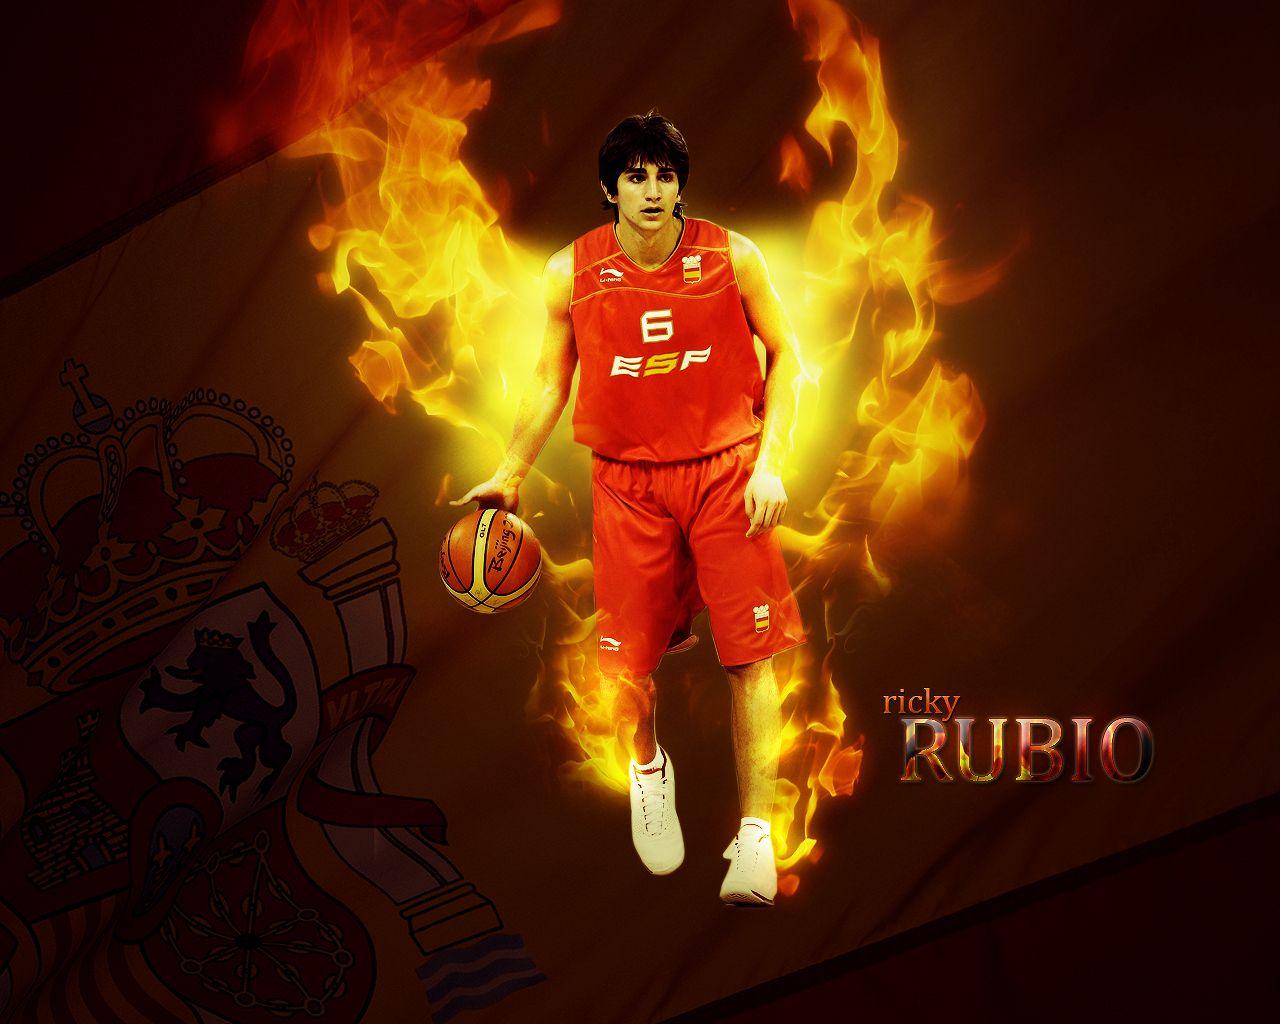 Ricky Rubio image Red Fire Spain HD wallpaper and background photo